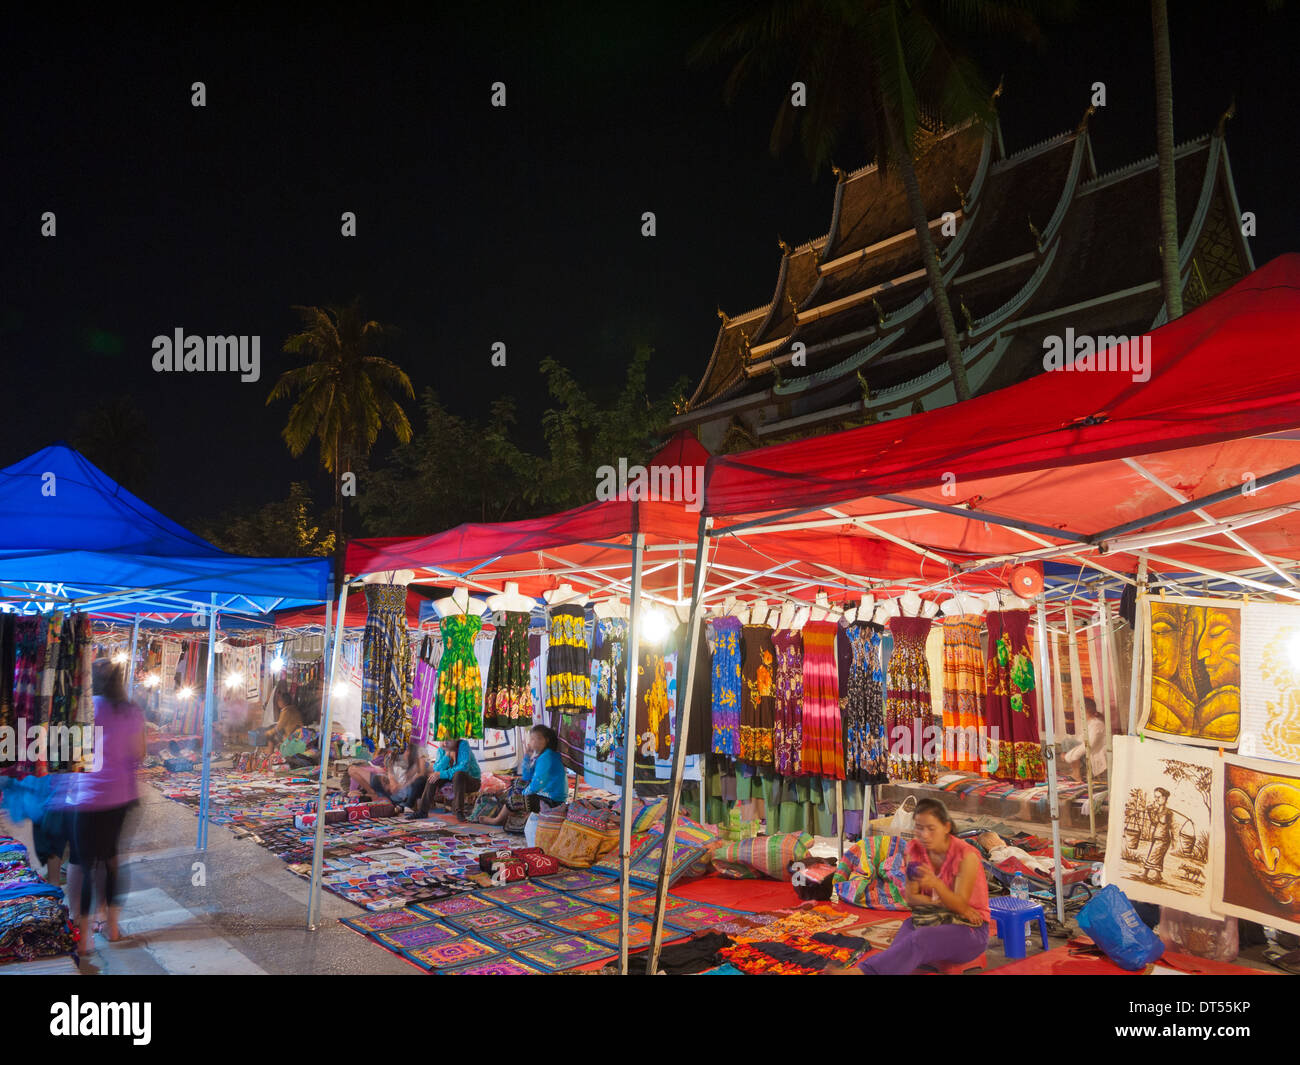 A view of the merchandise and souvenirs on sale at the Night Market in Luang Prabang, Laos. Stock Photo